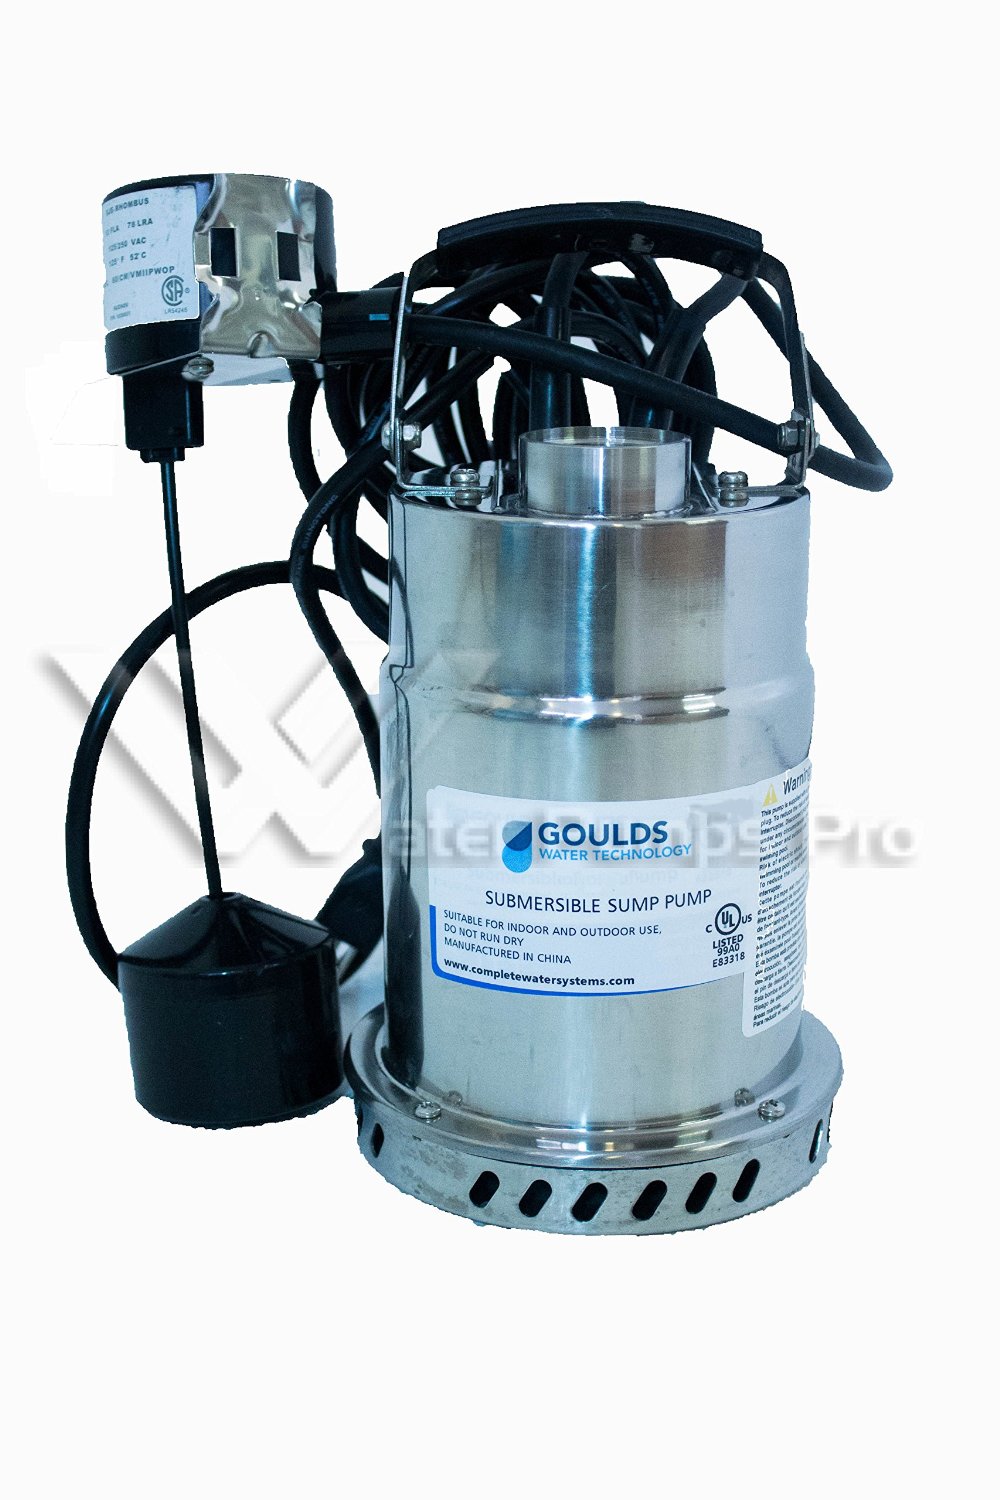 Goulds STS21M 1/4HP 115V Submersible Sump Pump 1 Phase Automatic